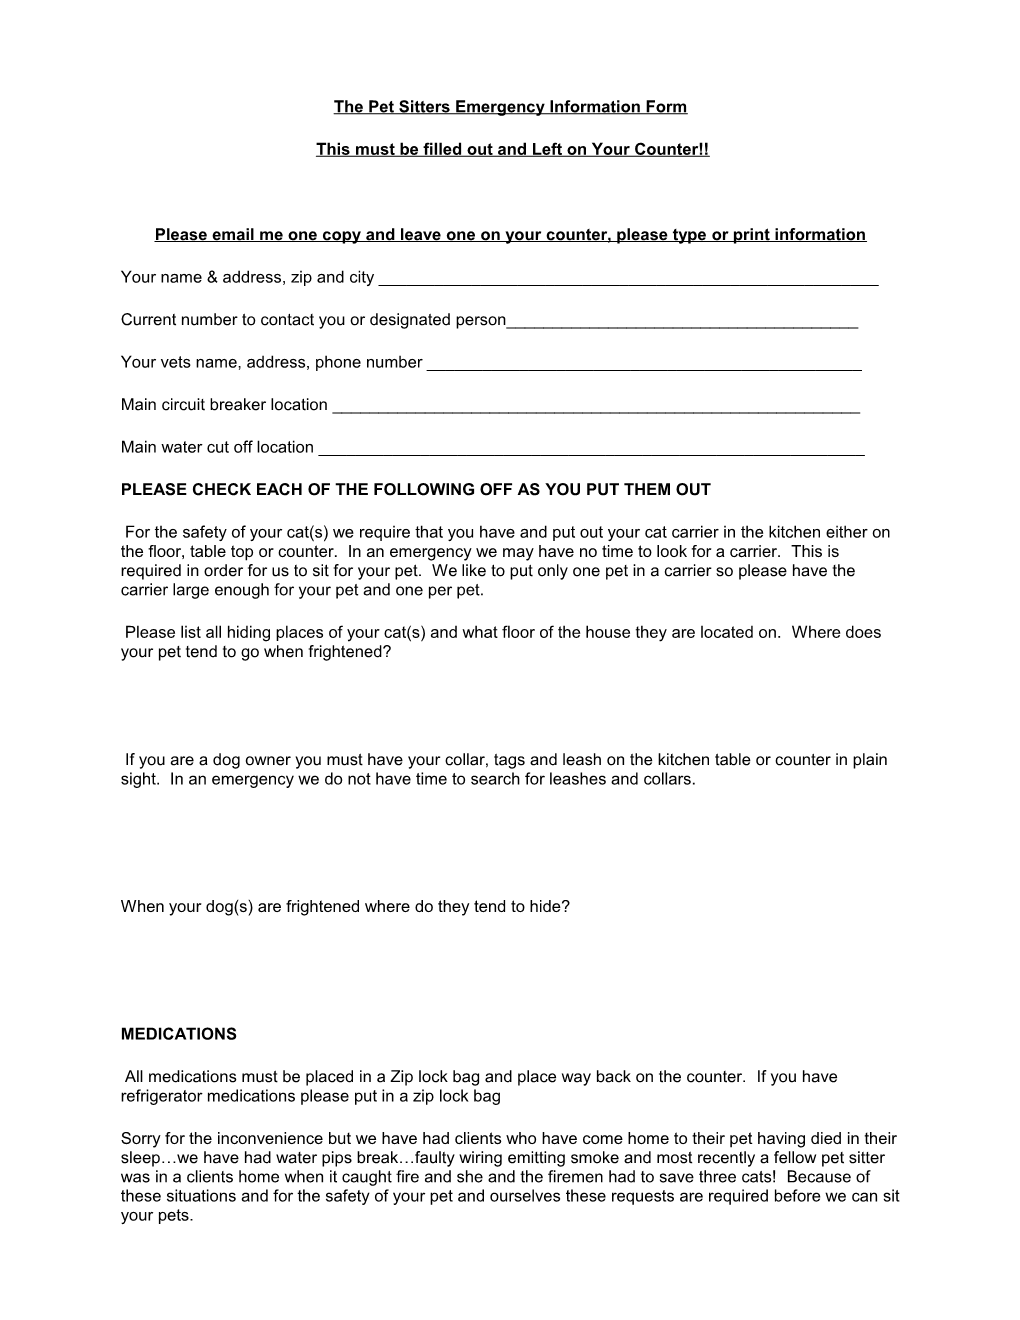 The Pet Sitters Emergency Information Form